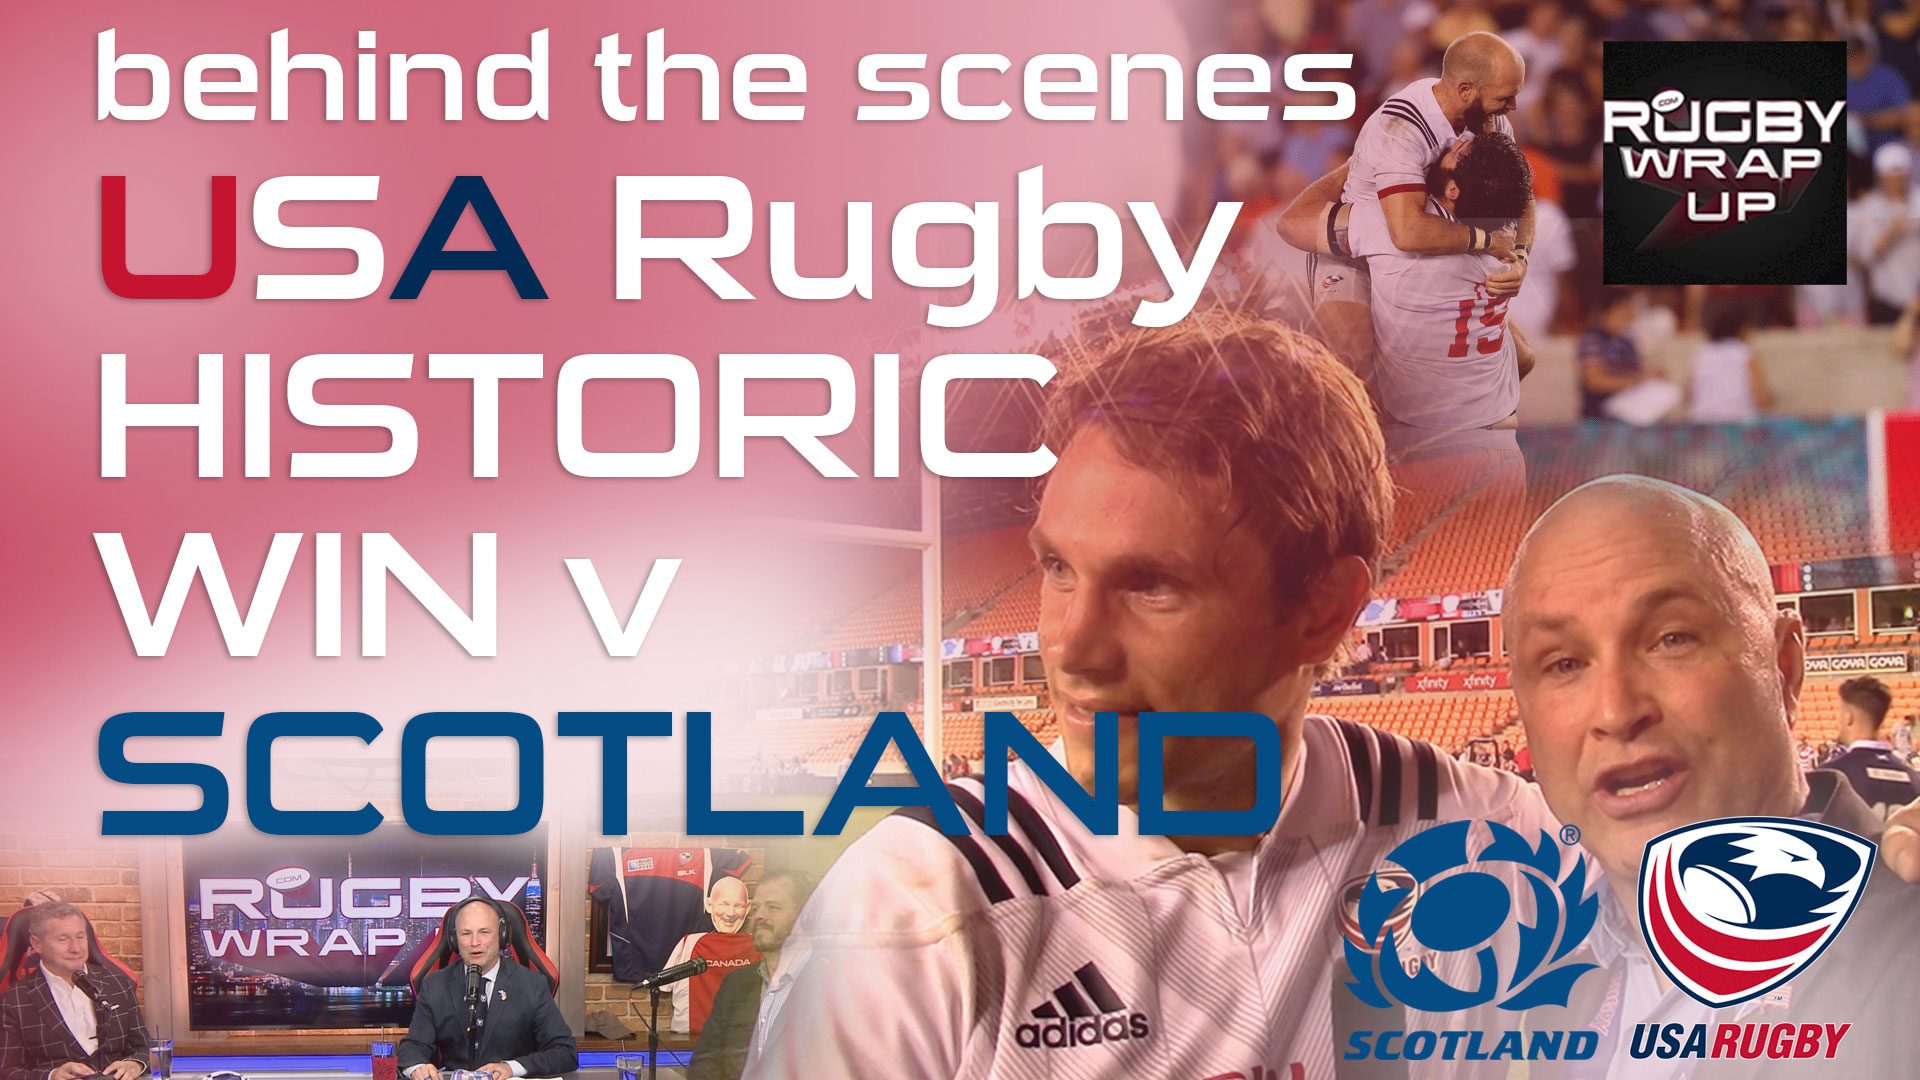 USA Rugby Win vs Scotland. On-Pitch Interviews, Studio Analysis, Rugby_Wrap_Up